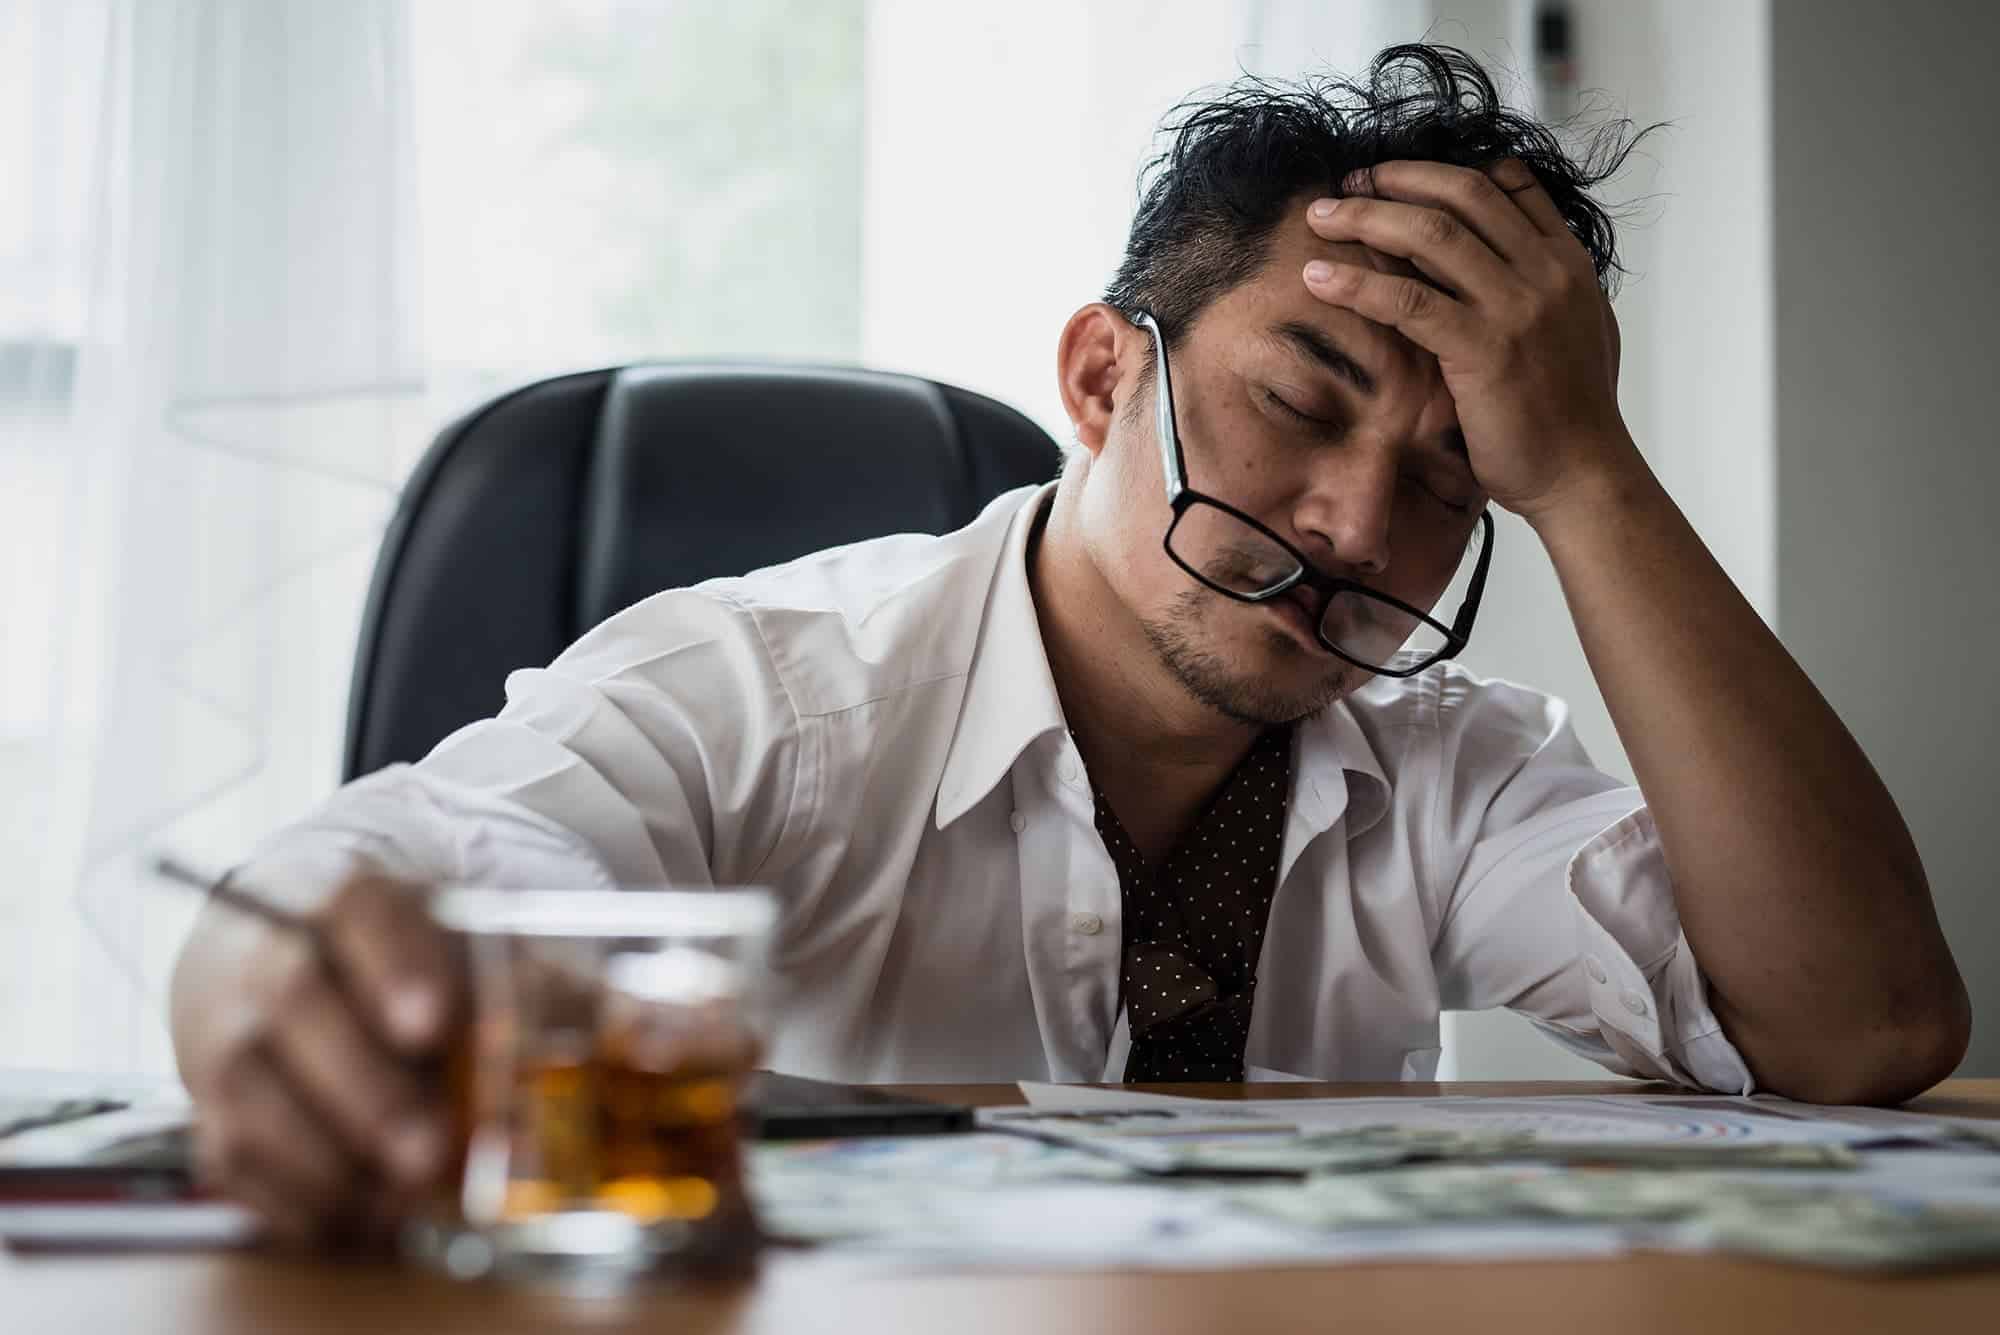 Is Your Career Making You Use?: Jobs with the Highest Rates of Alcohol and Drug Addiction